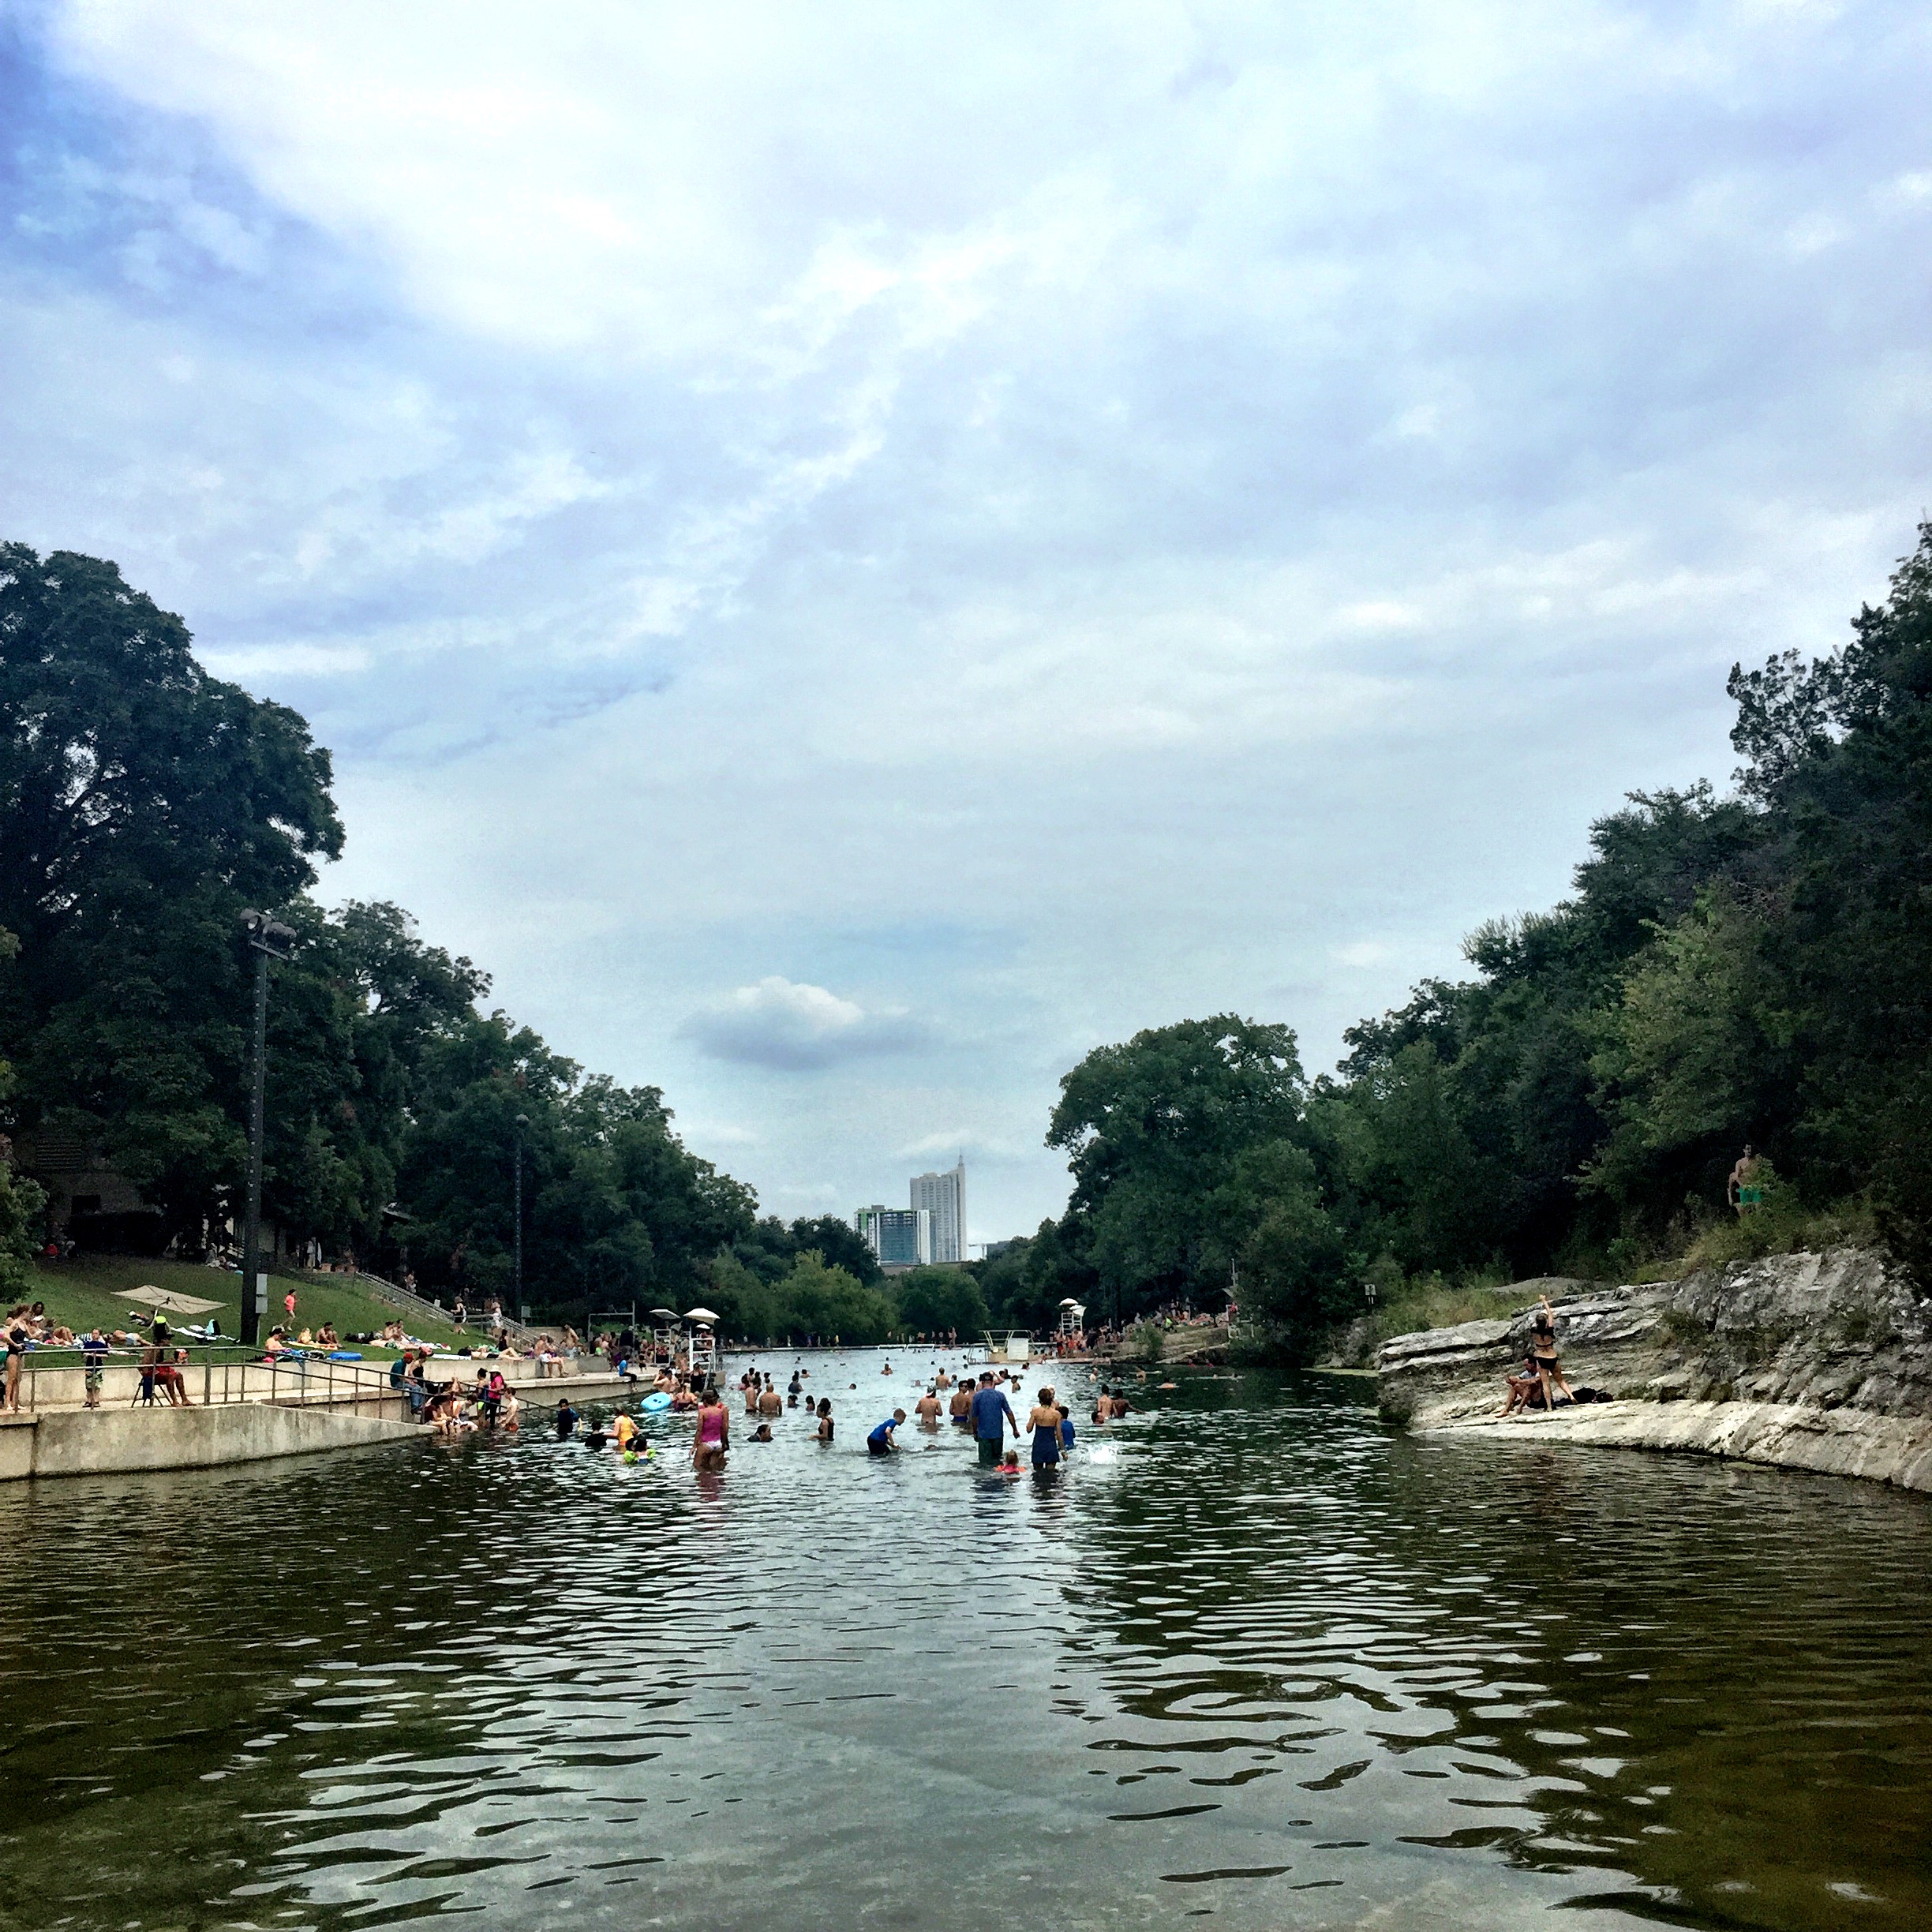 Tips for where to eat and the best outdoor activities in Austin, Texas.